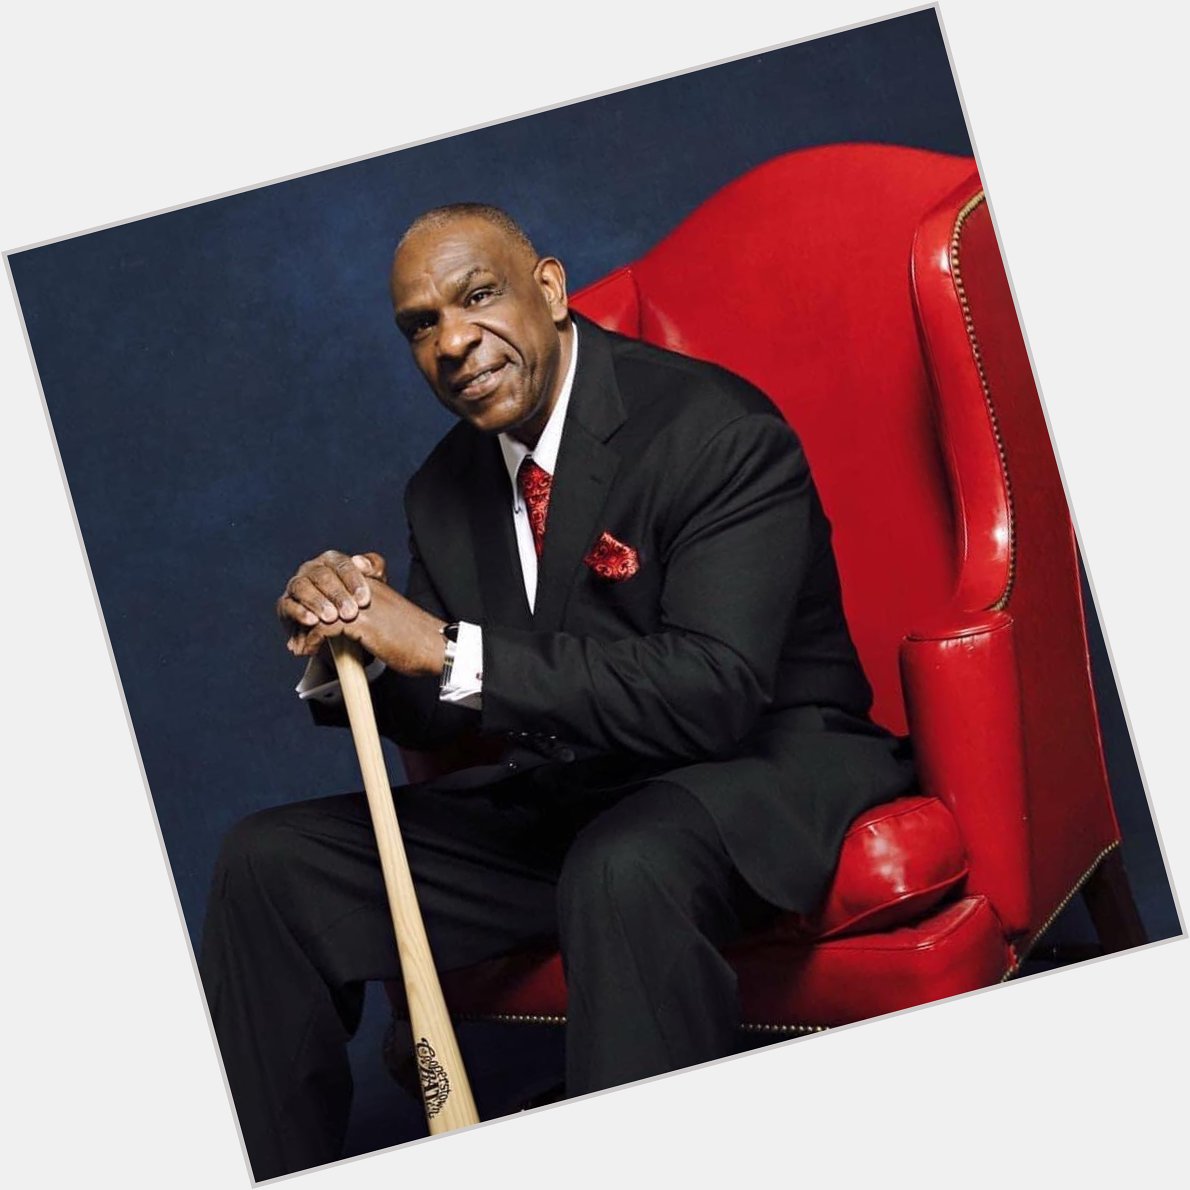 Bonne fête and a happy 69th birthday to royalty Andre Dawson !
Photo 